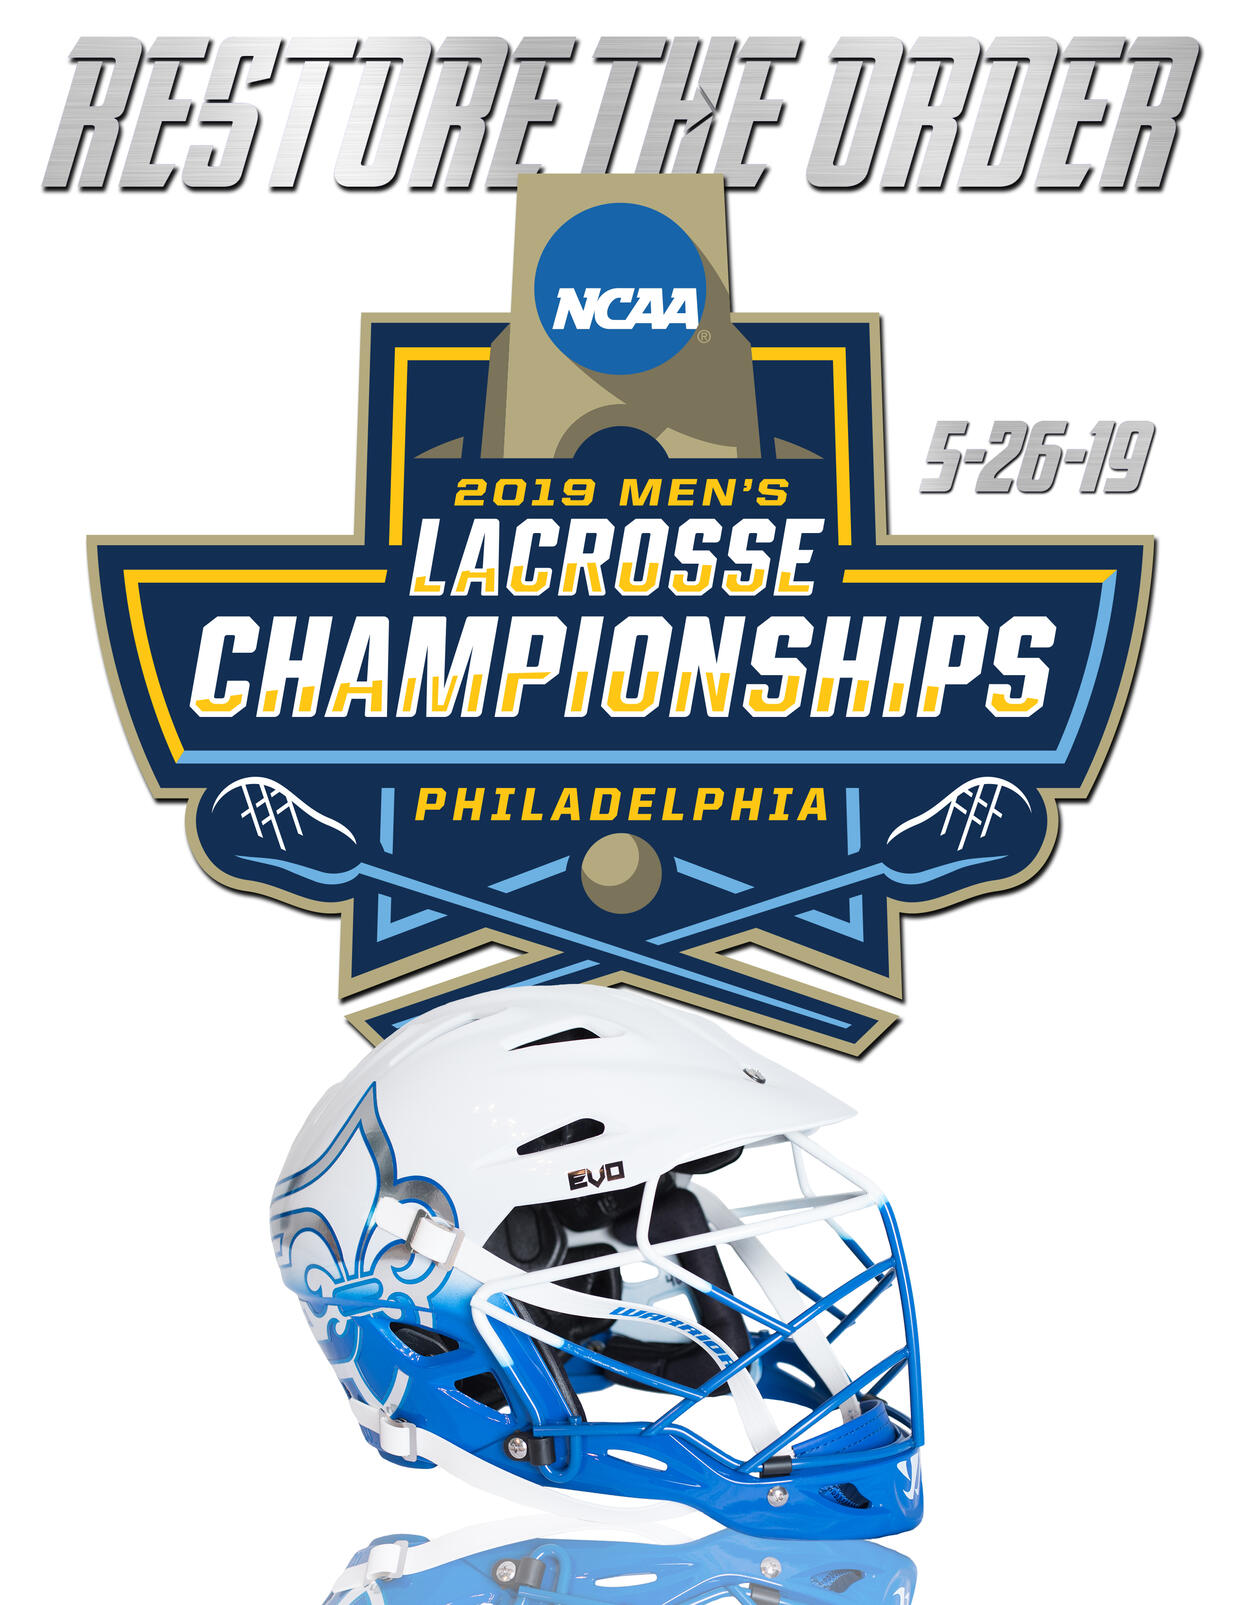 How To Watch The Lacrosse National Championship Game On Sunday, May 29